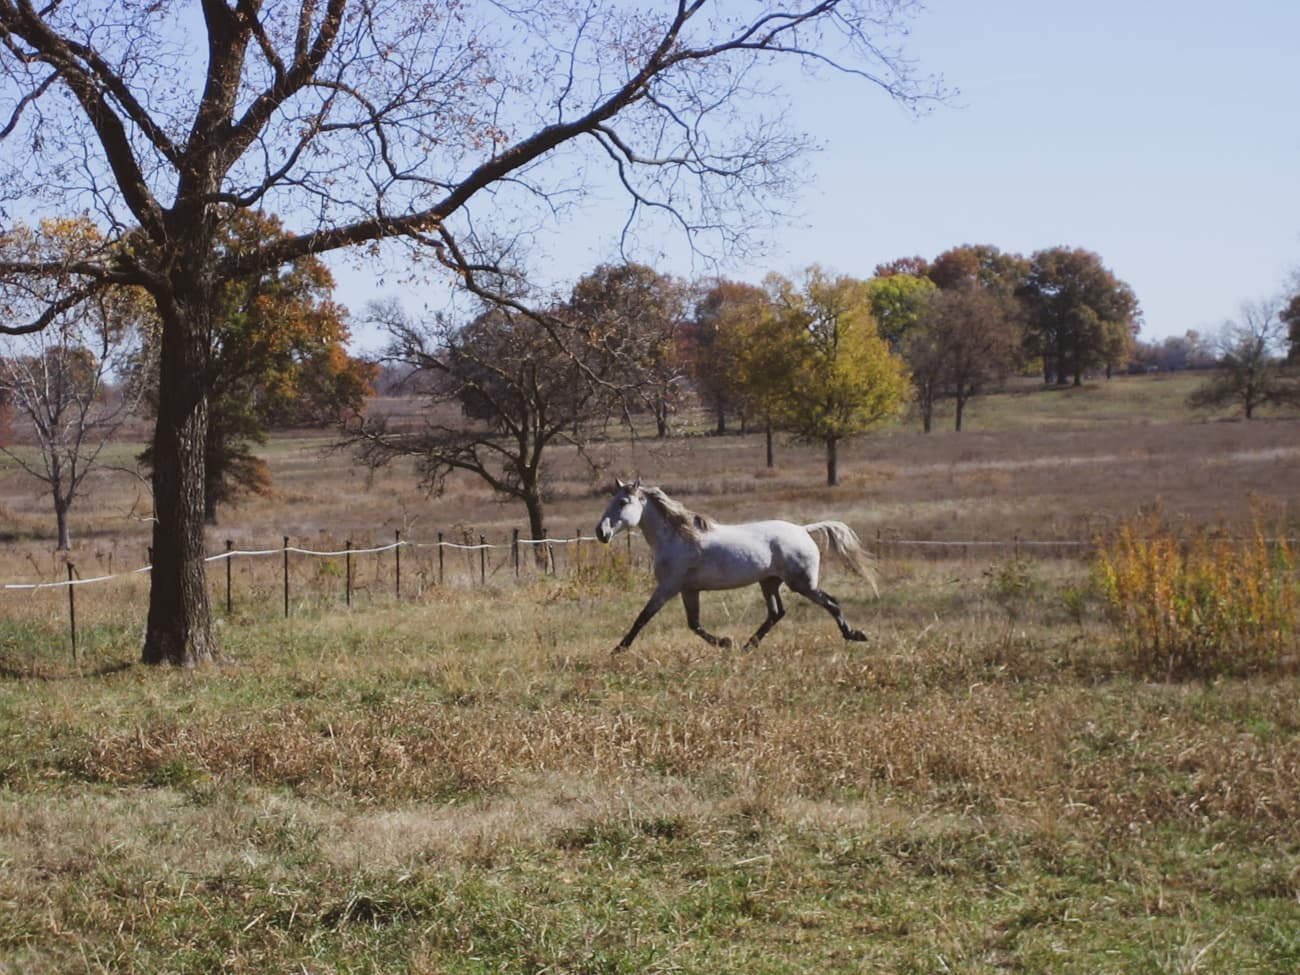 Horse loose in a pasture trotting with an extended trot similar to an advanced dressage movement